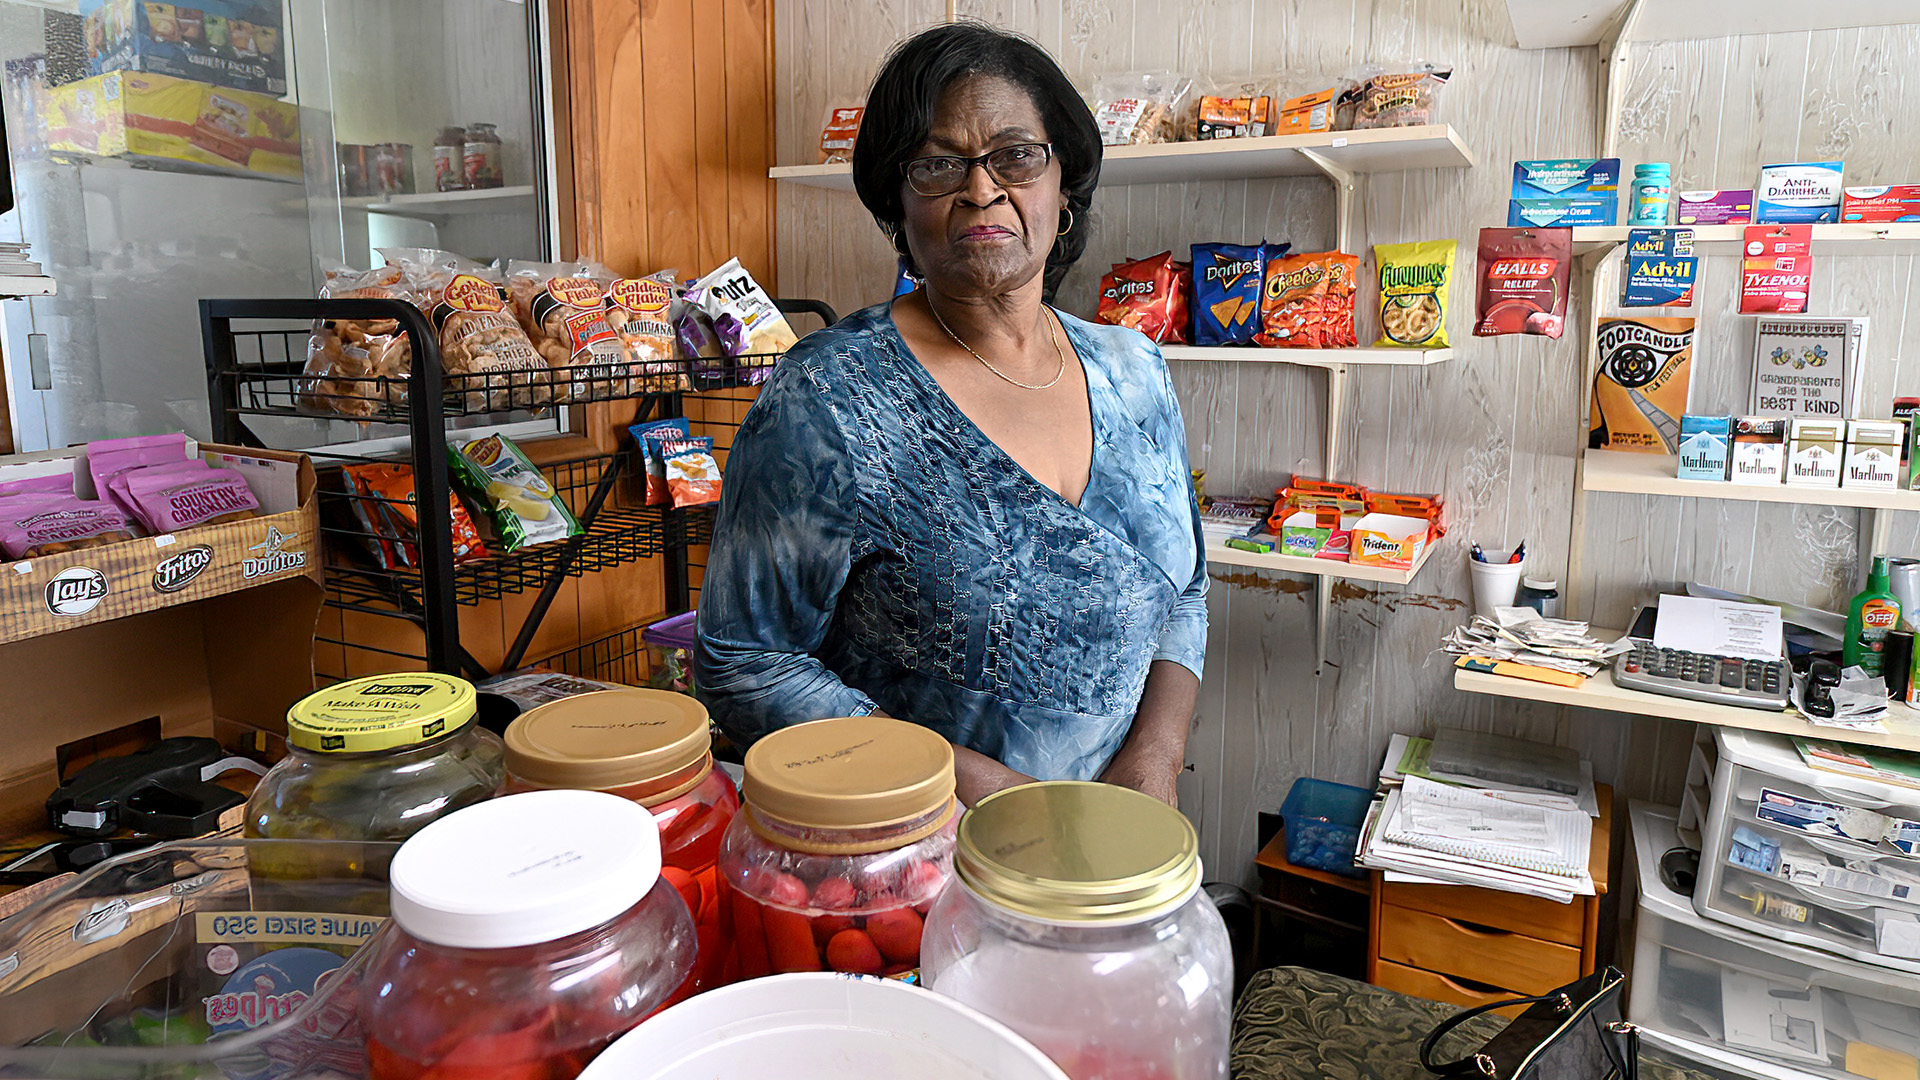 Dorothy Oliver poses for a portrait while standing behind a counter with multiple jars of food and in front of racks and wall-mounted shelves stocked with food, medications and cigarettes, with wood and plastic filing storage bins on the floor of a room with wood-paneled walls and an interior window.